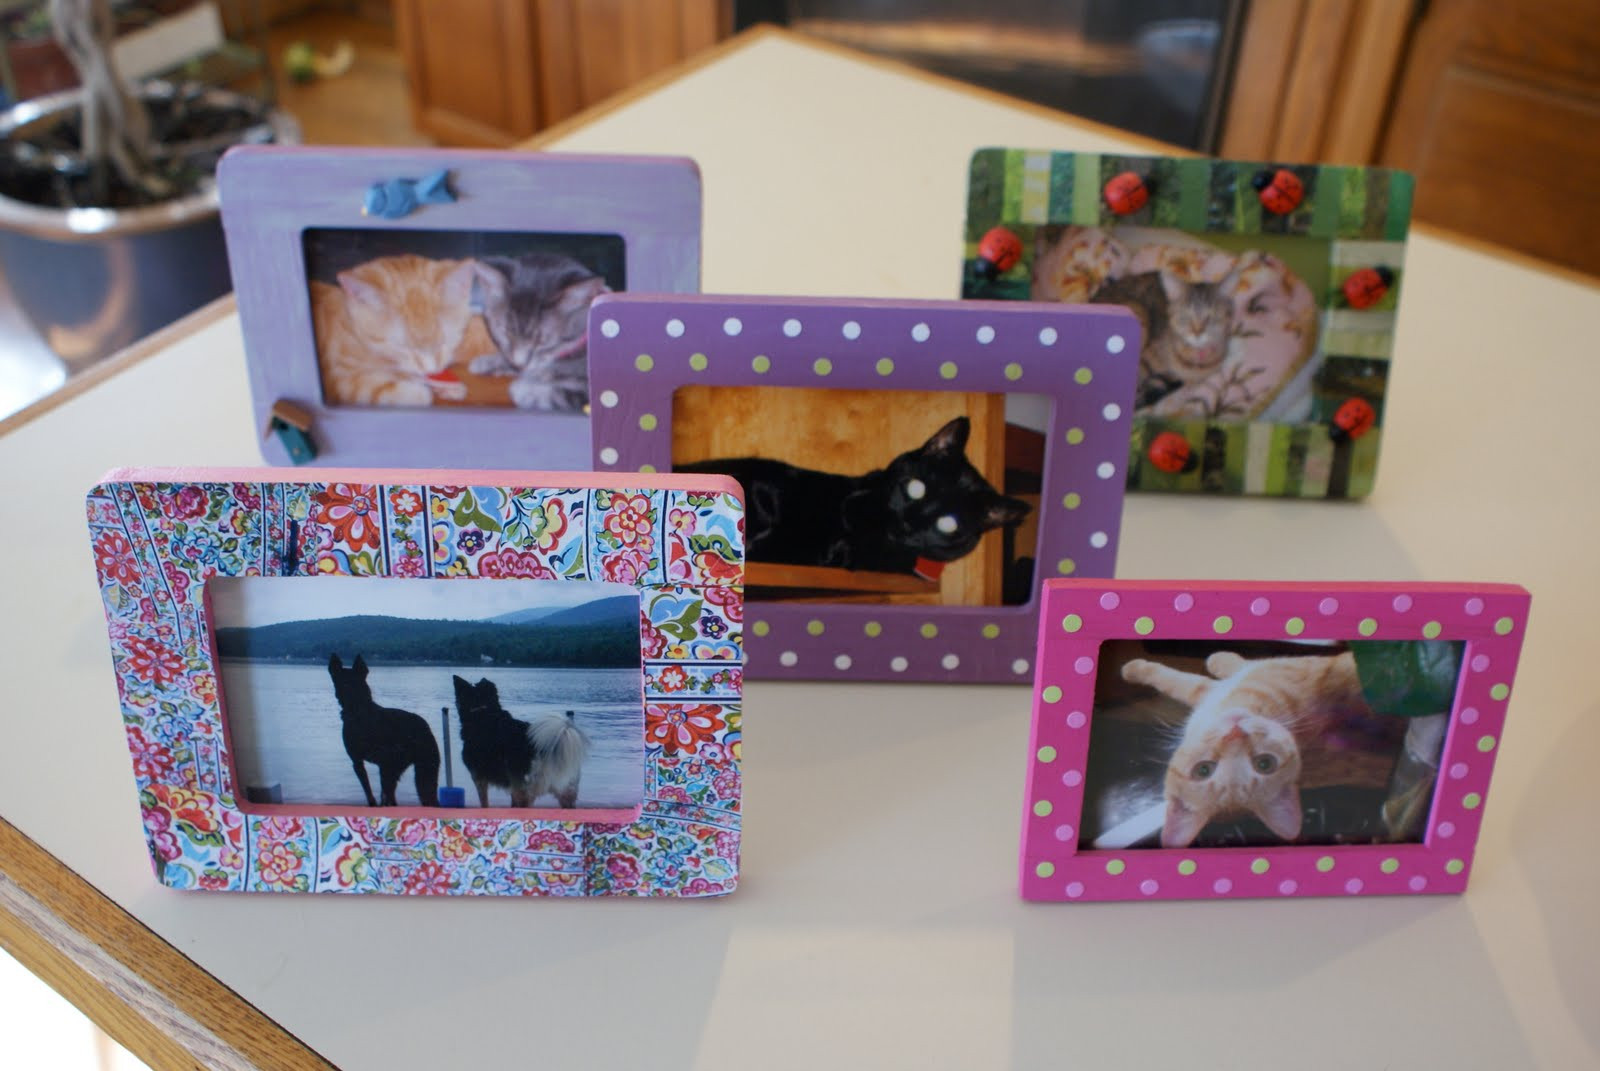 Picture Frame Decorating Craft Ideas
 Babbling Brooke Getting Crafty Decorating Picture Frames